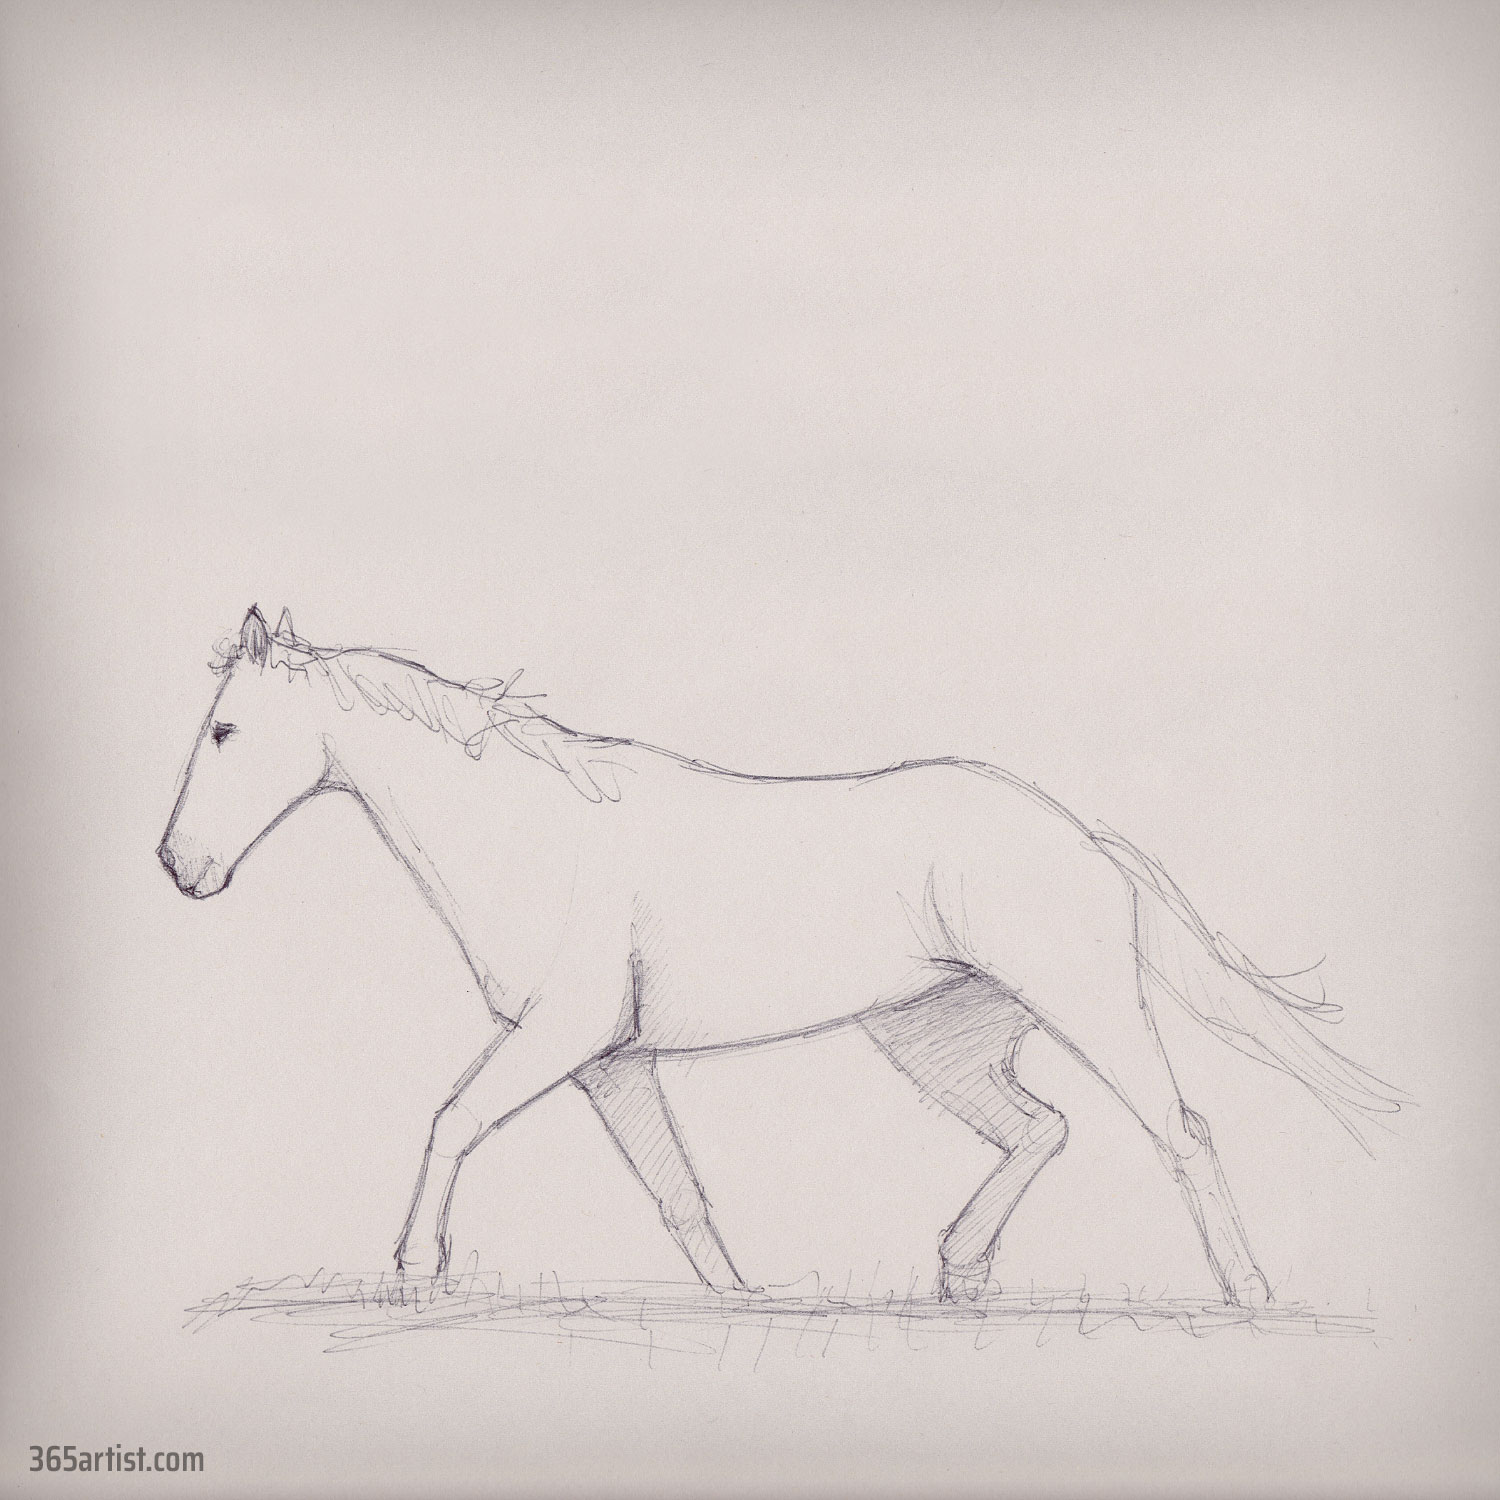 pen drawing of a mustang horse